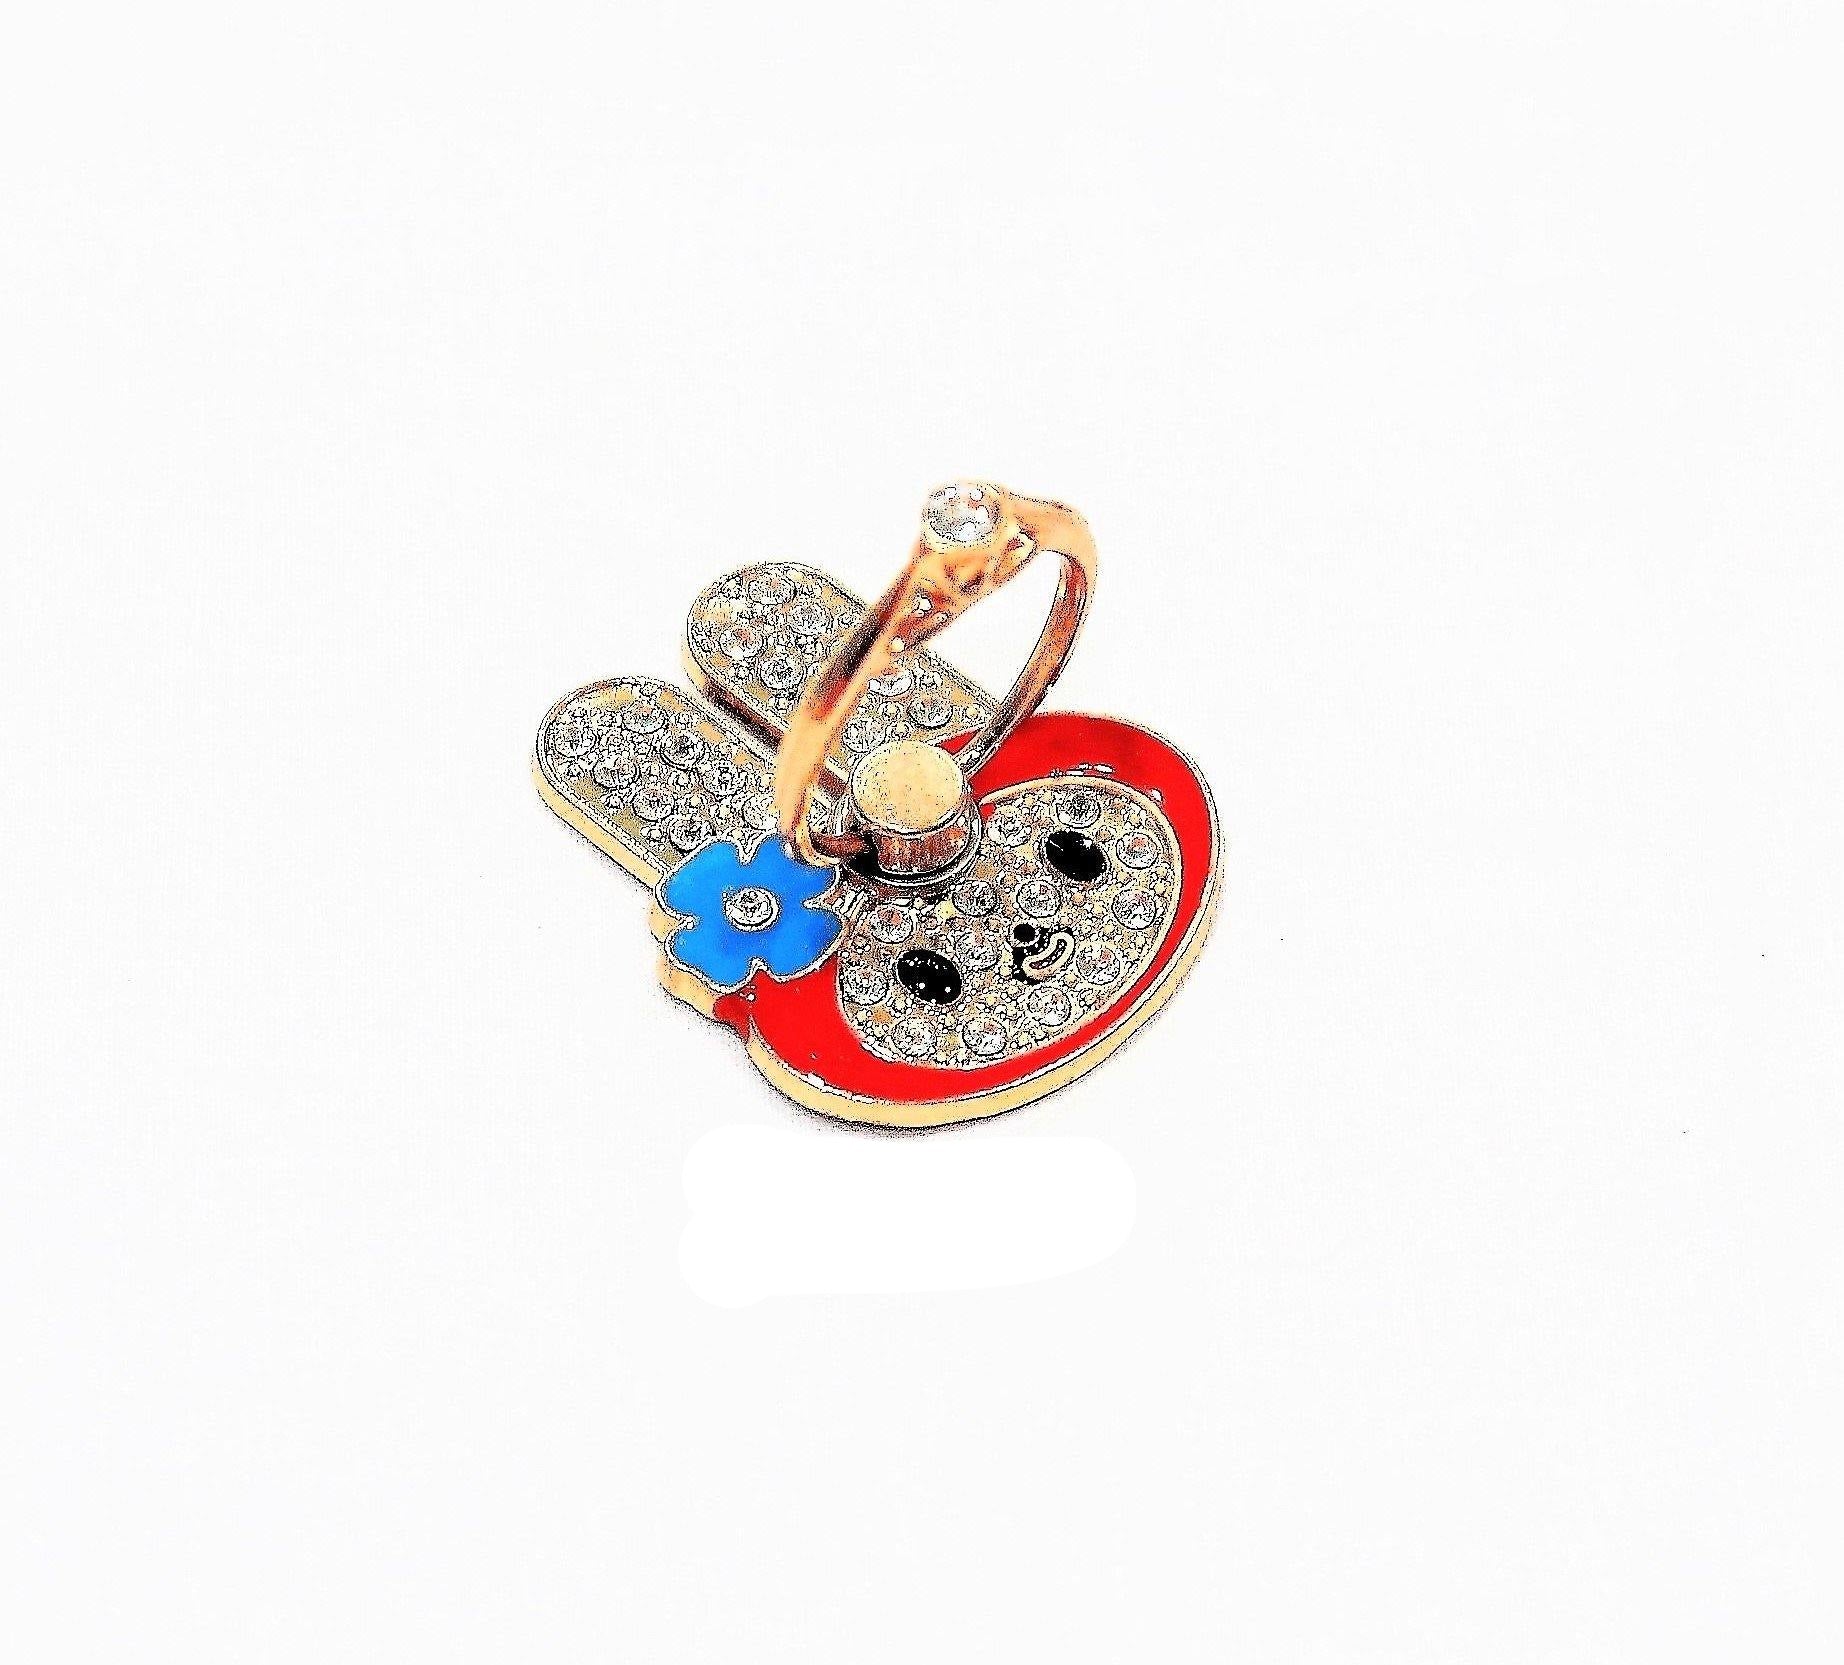 Indian Petals Bunny Shaped RhineStones Studded Metal Mobile Holder Ring Stand - Indian Petals